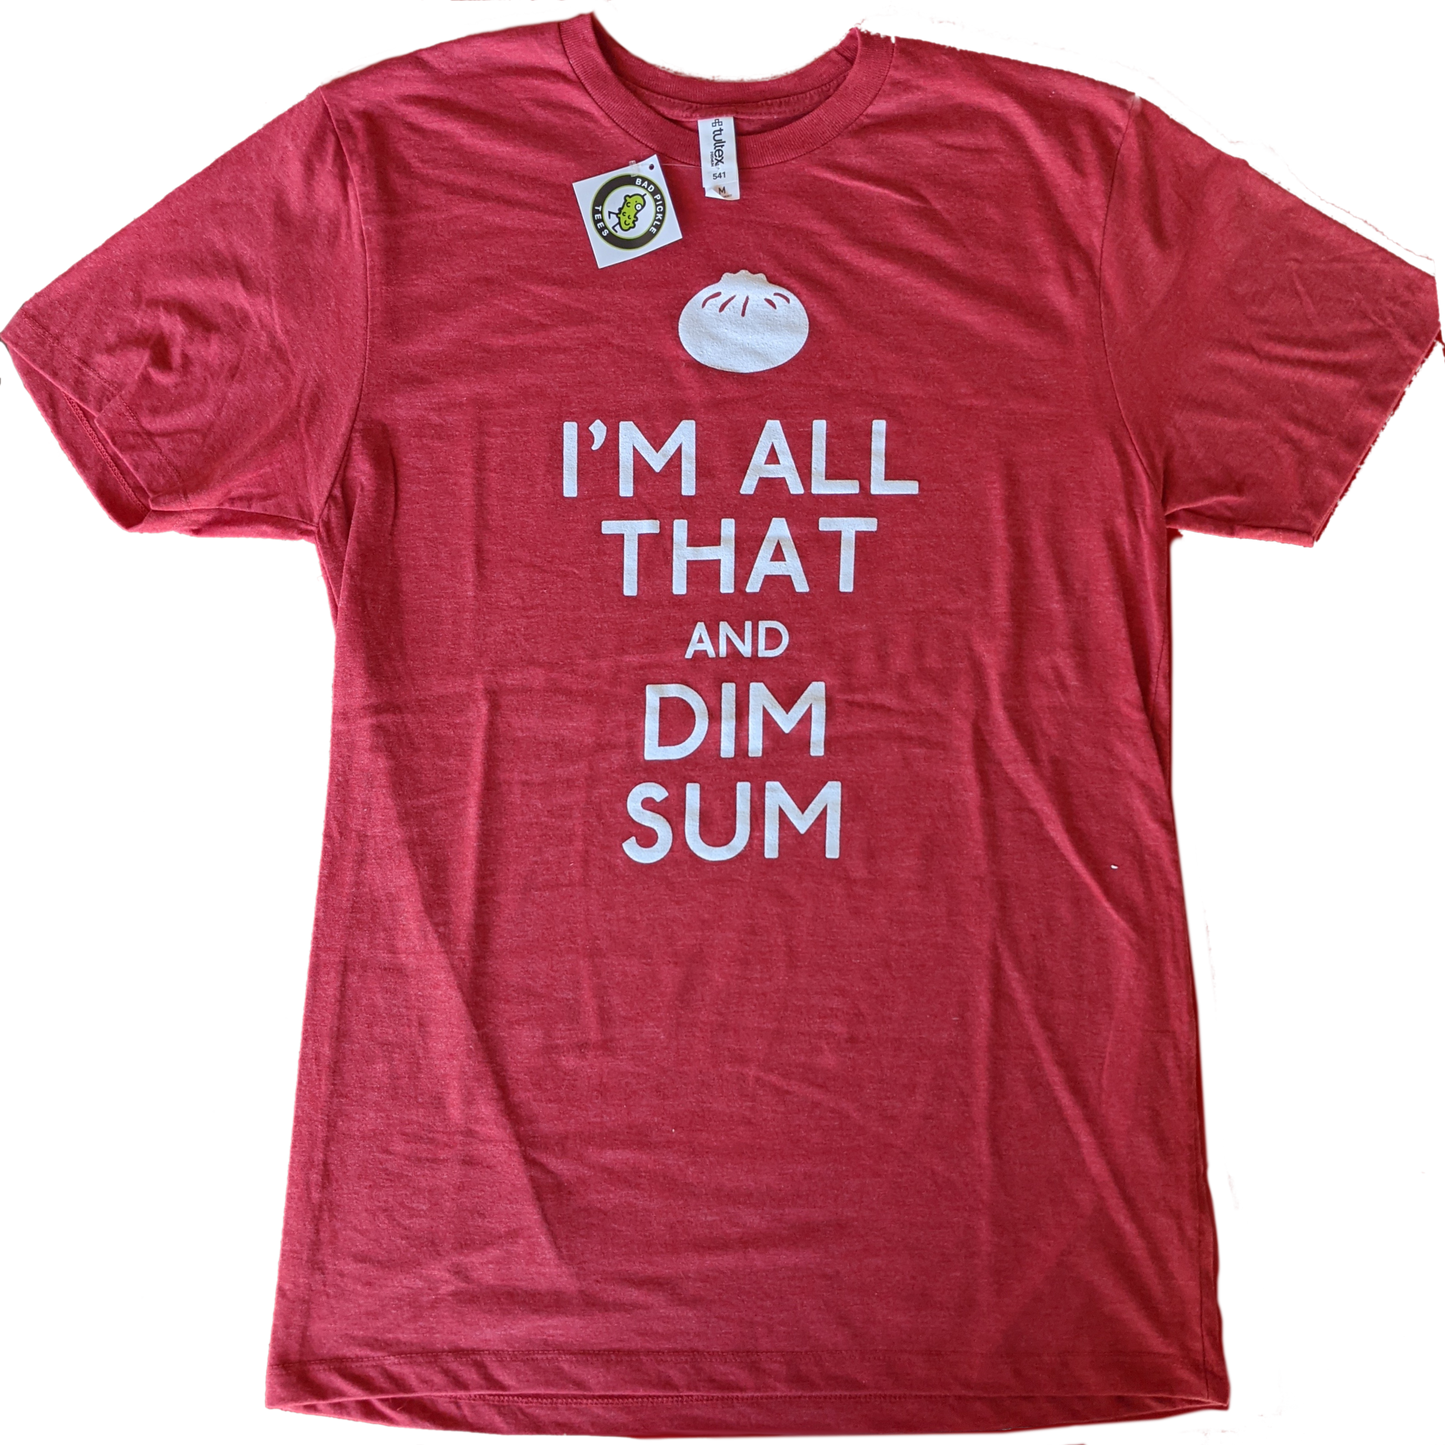 "I'm All That and Dim Sum" Men's T-Shirt